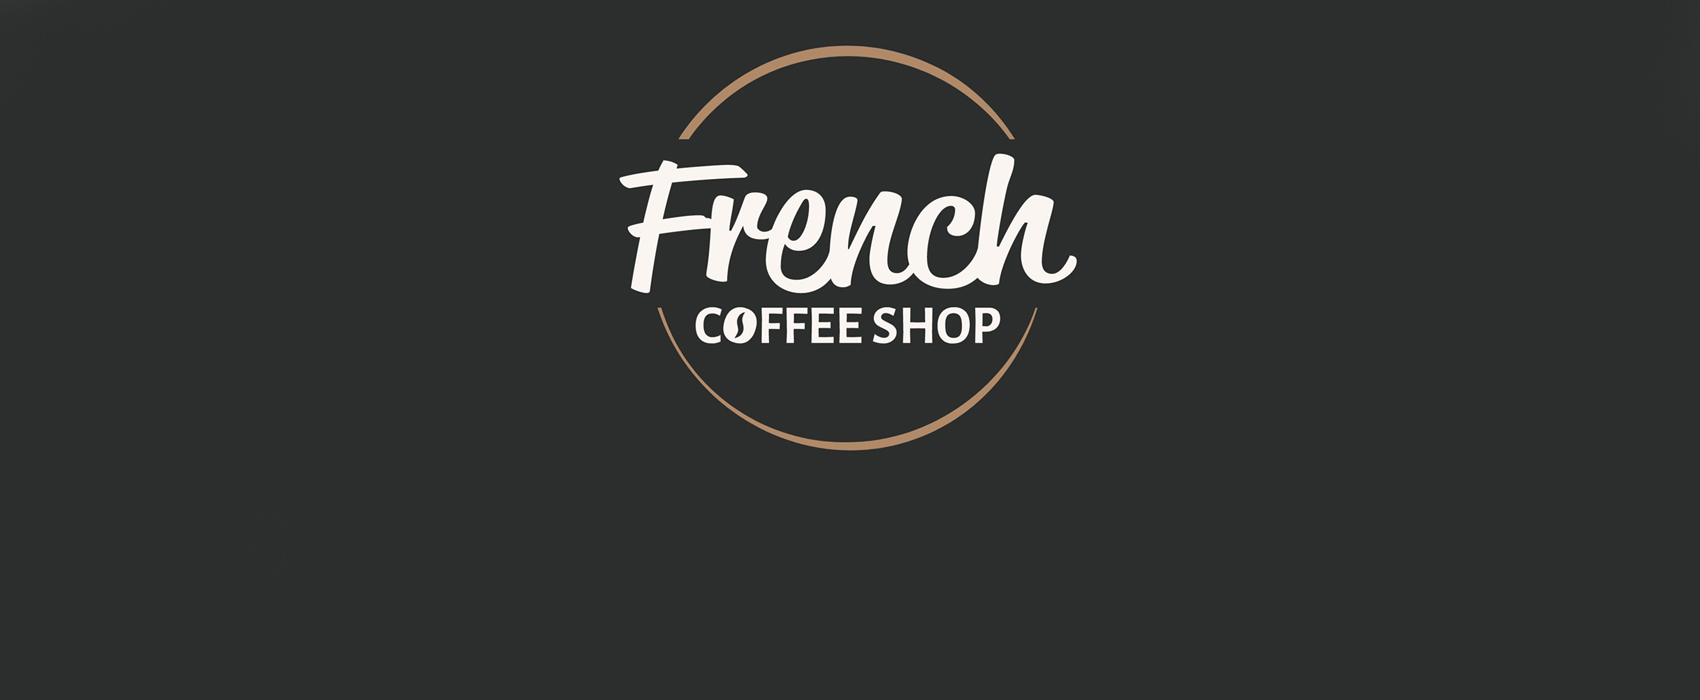 French coffee shop